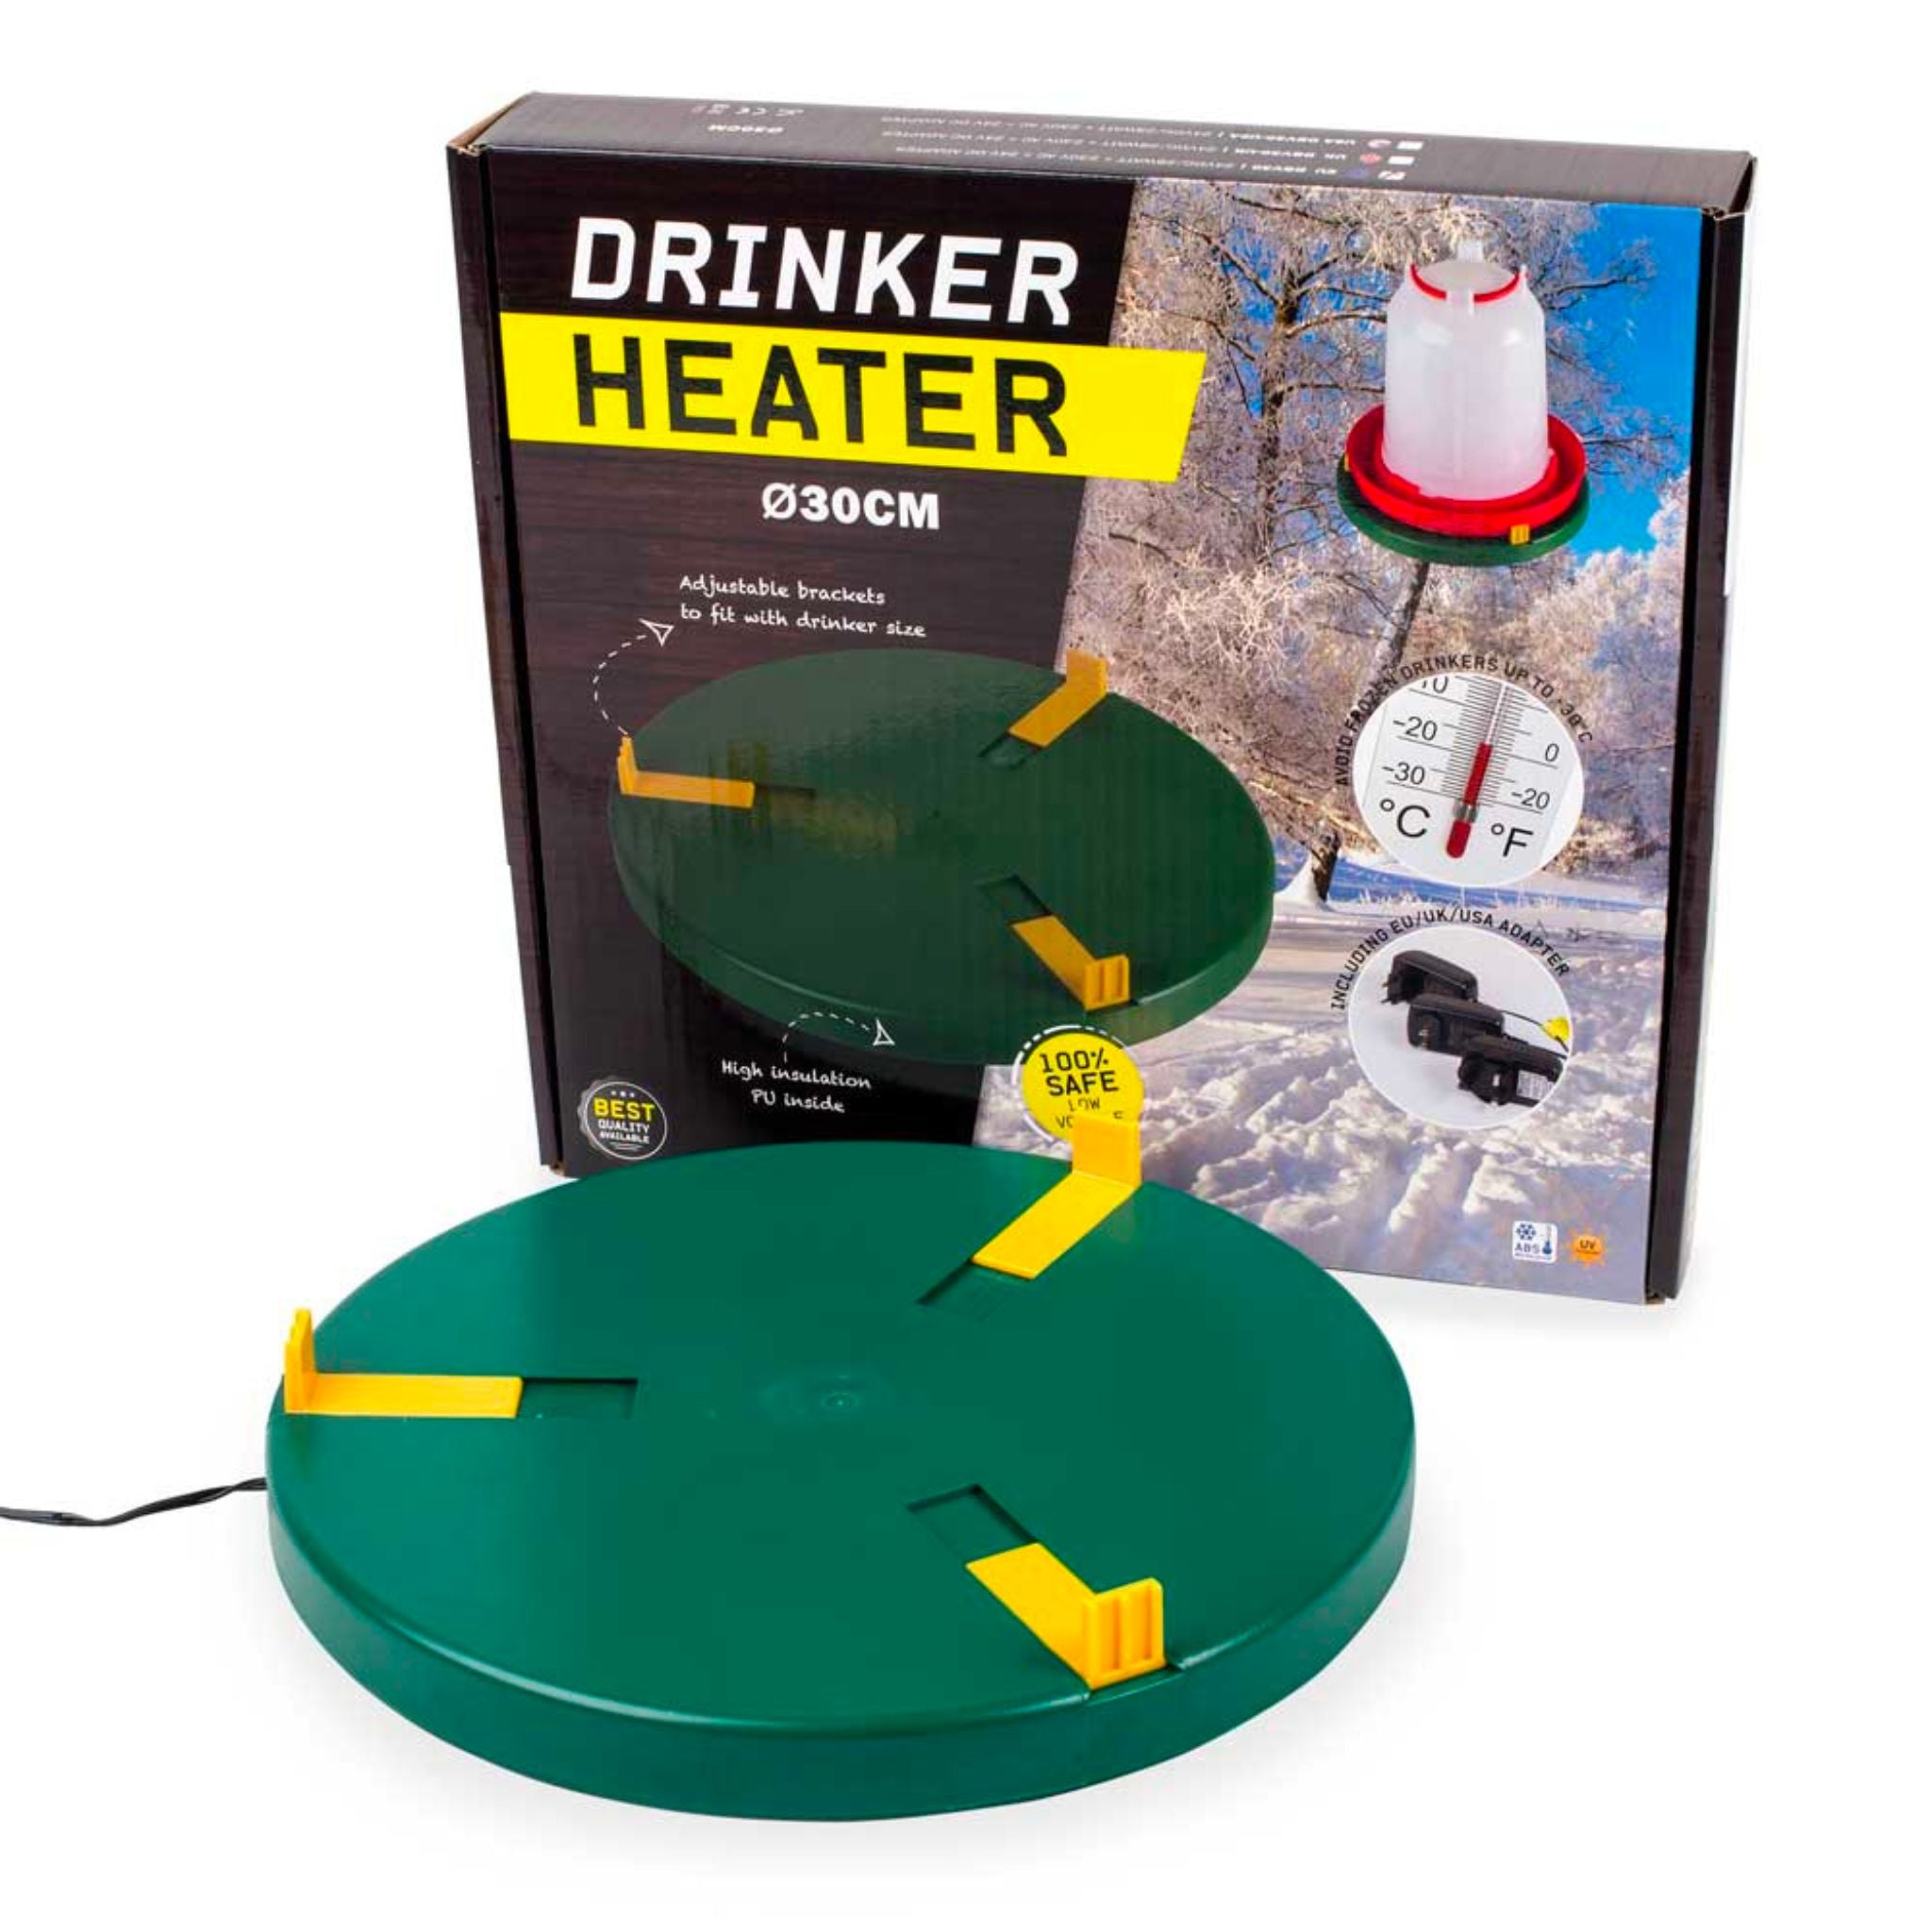 Hatching Time Drinker heater is shown in image in front of display box. Box shows proper placement of drinker on top of heater, plug options and thermometer. Box shows that heater has adjustable brackets to fit different size drinkers.